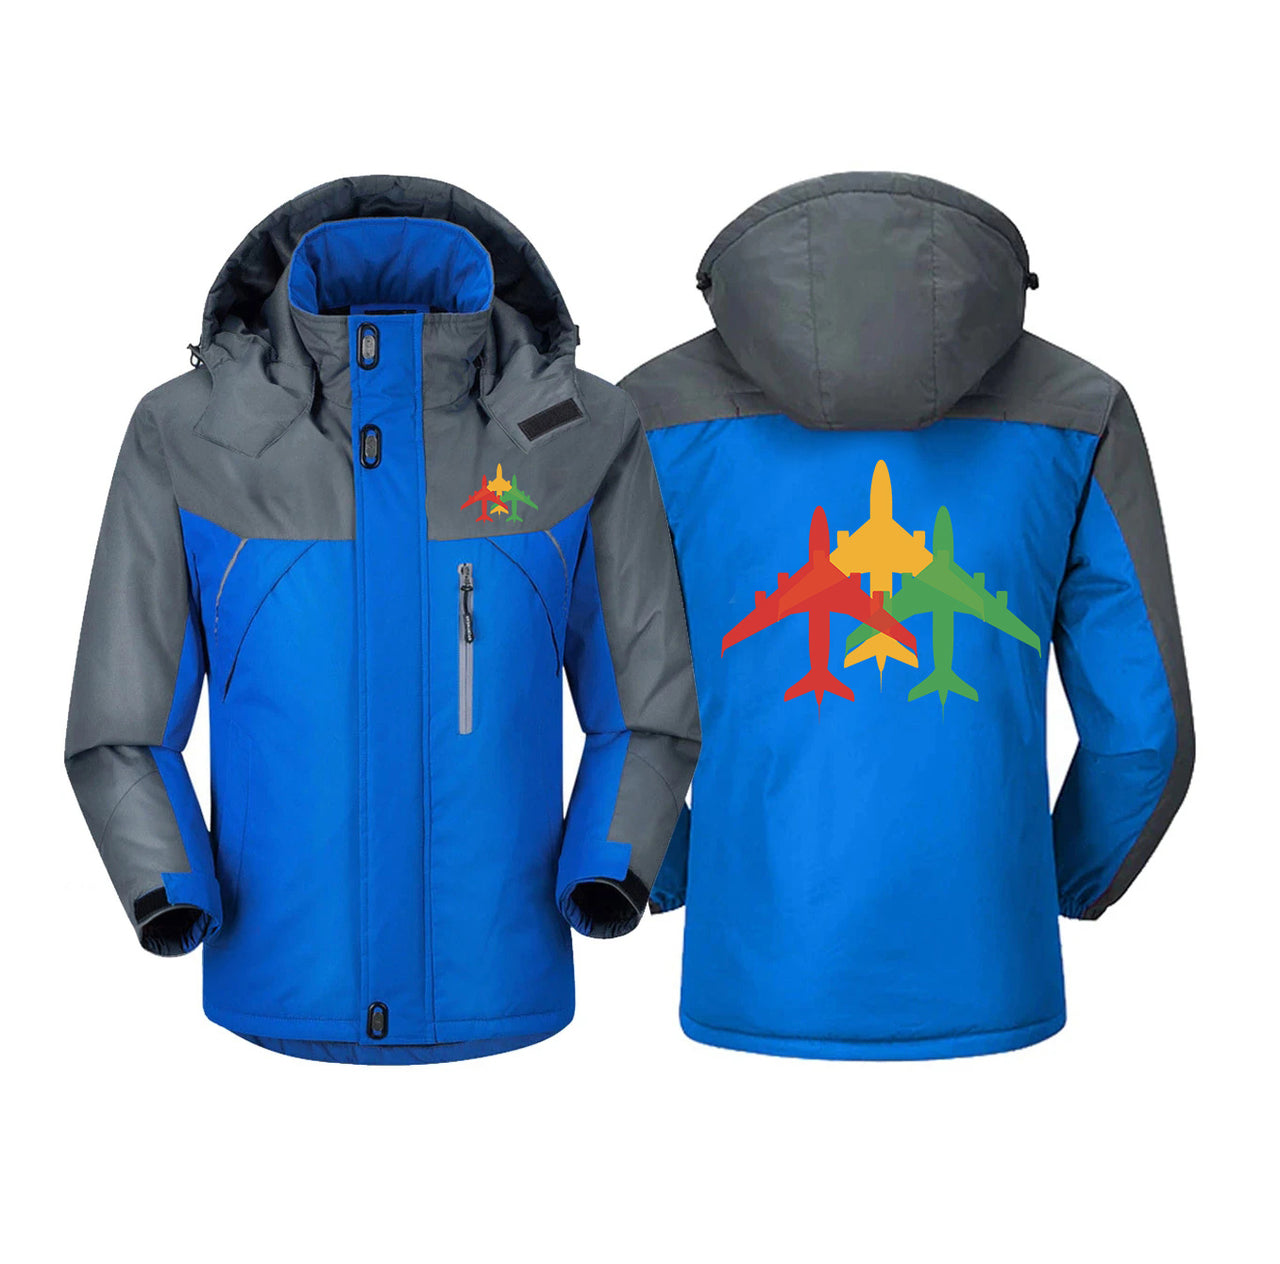 Colourful 3 Airplanes Designed Thick Winter Jackets